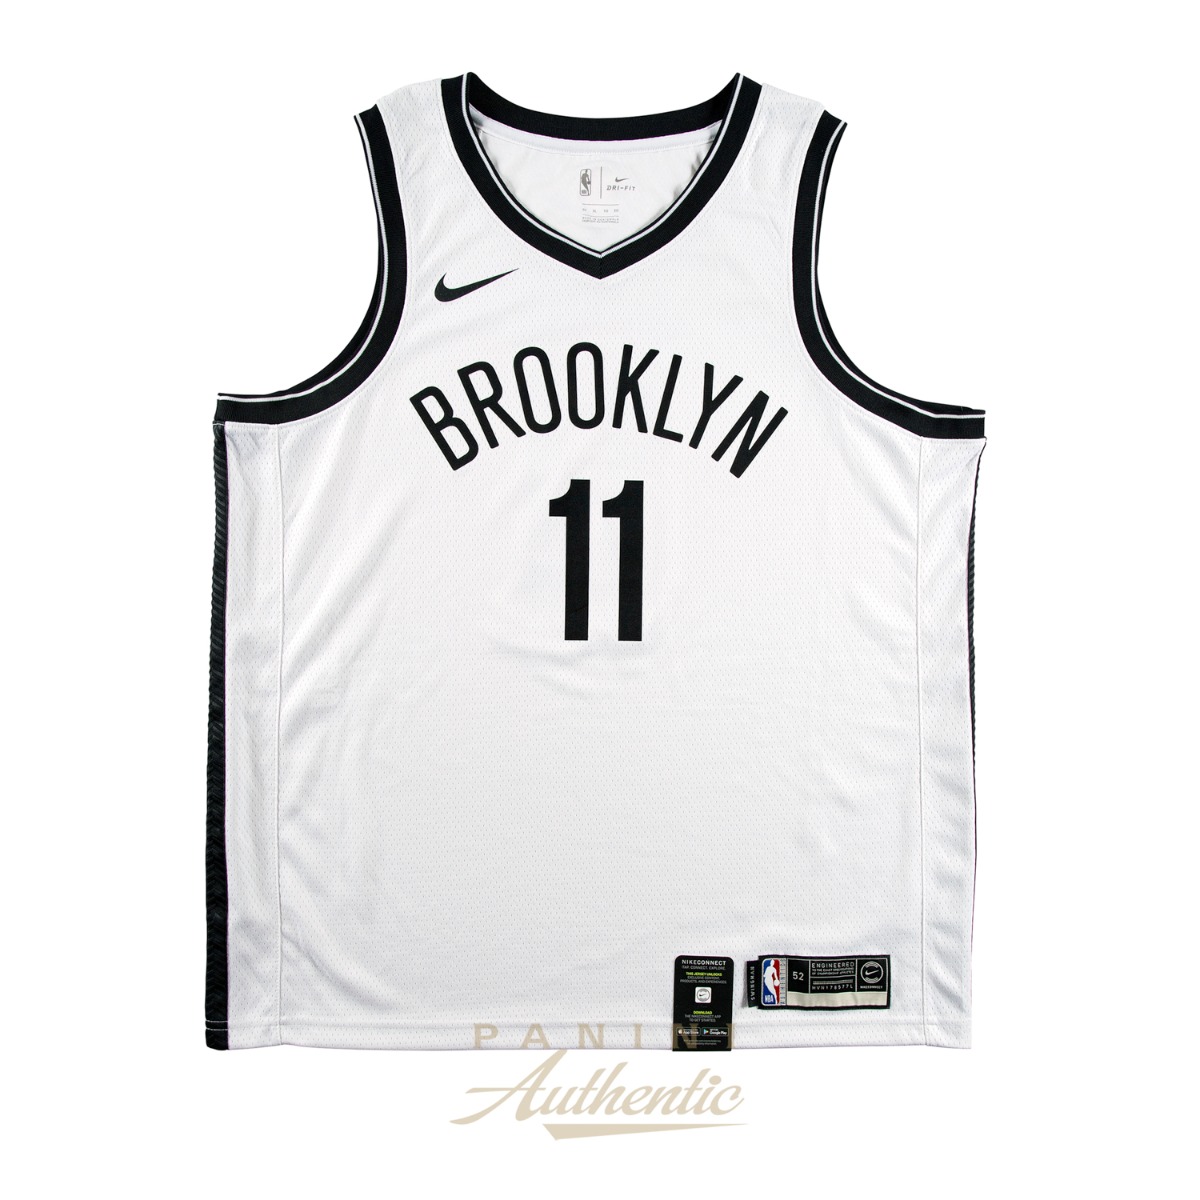 Brooklyn Nets Kyrie Irving Fanatics Authentic Game-Used White